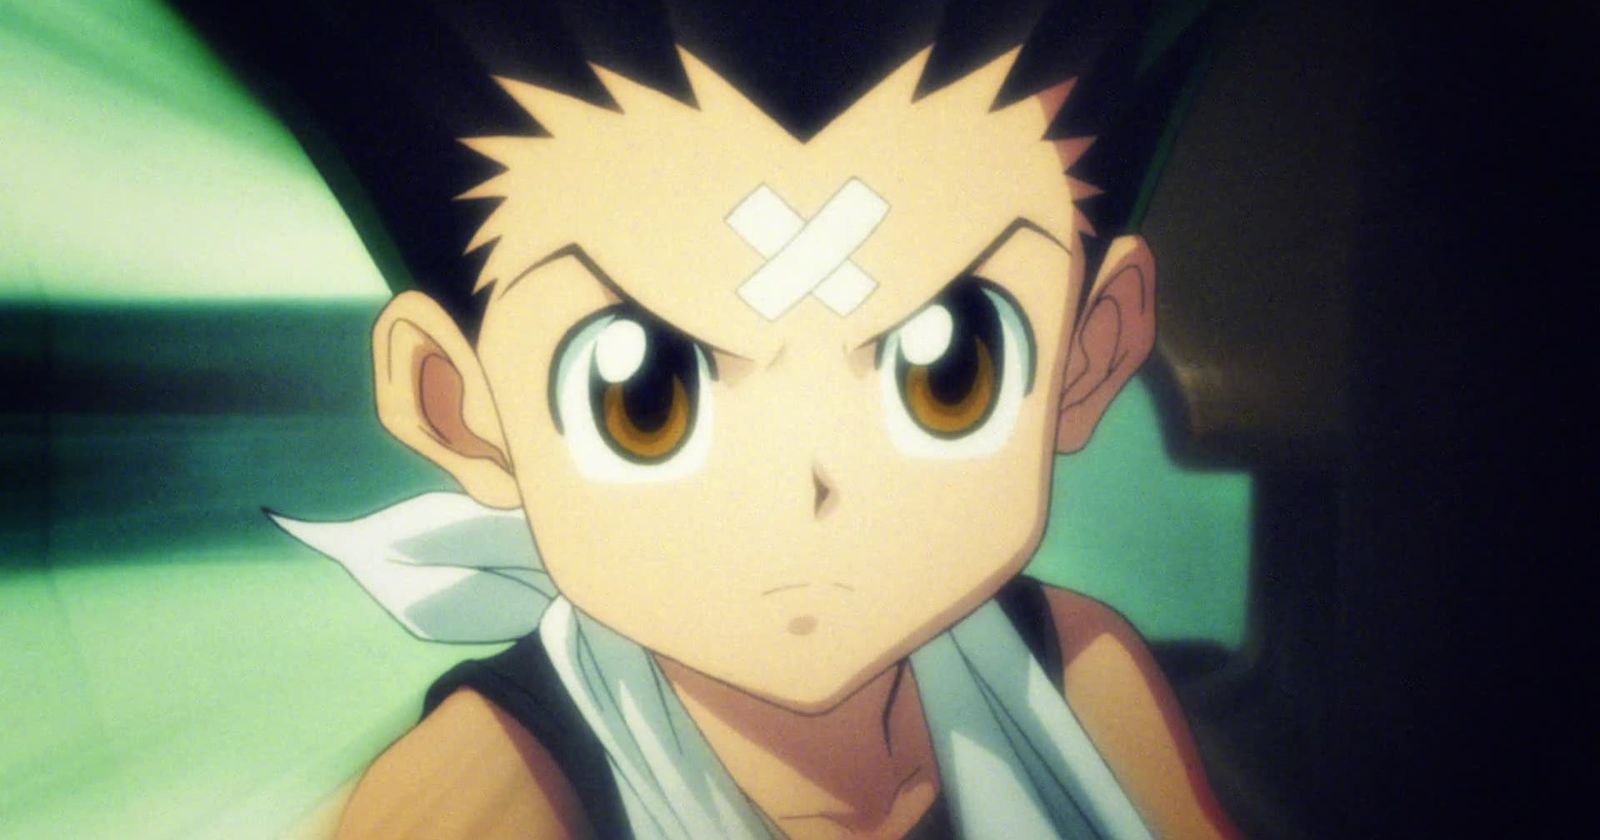 It's official: No new Hunter x Hunter episodes in 2015 ends